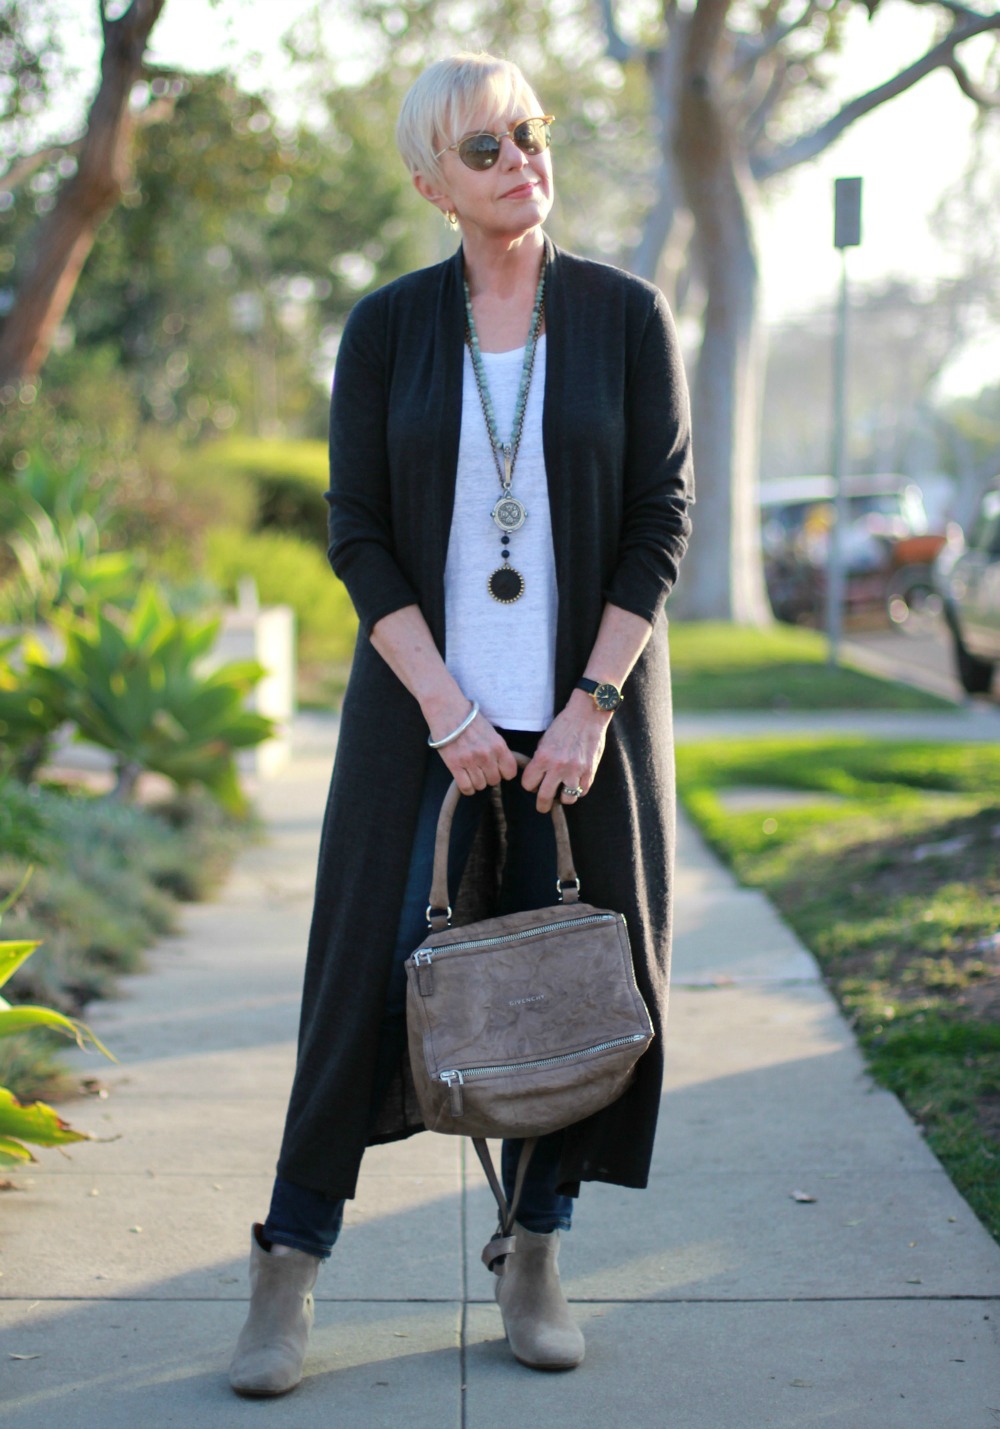 Givenchy Pandora, French Kande necklaces, Eileen Fisher cardigan